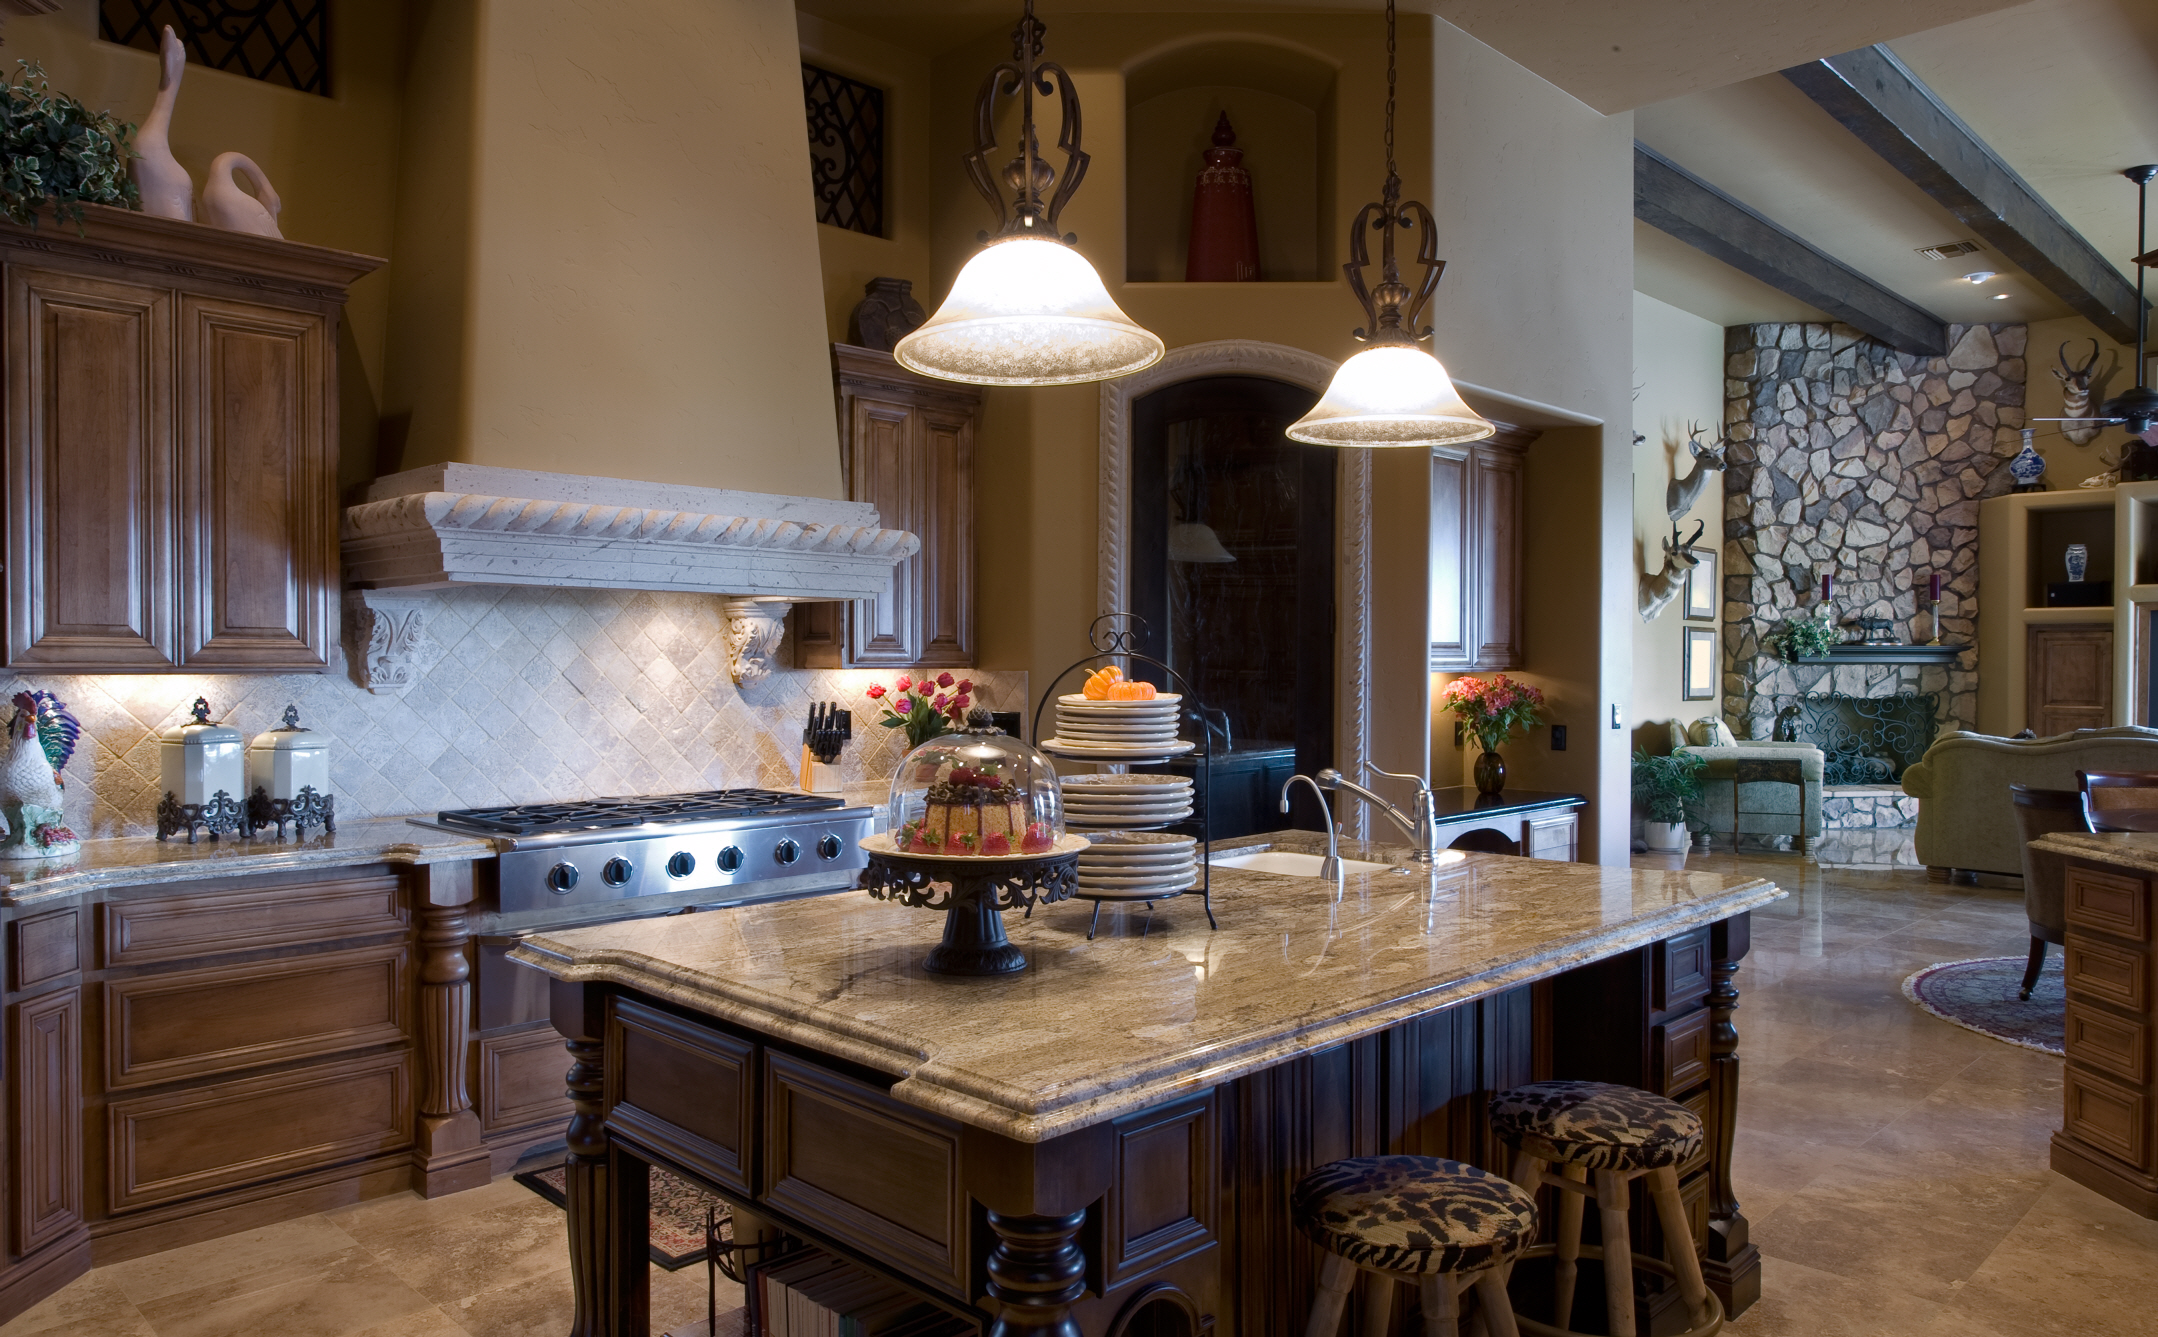 Create a cozy, nostalgic kitchen with classic elements, vintage fixtures, natural materials, and neutral tones.